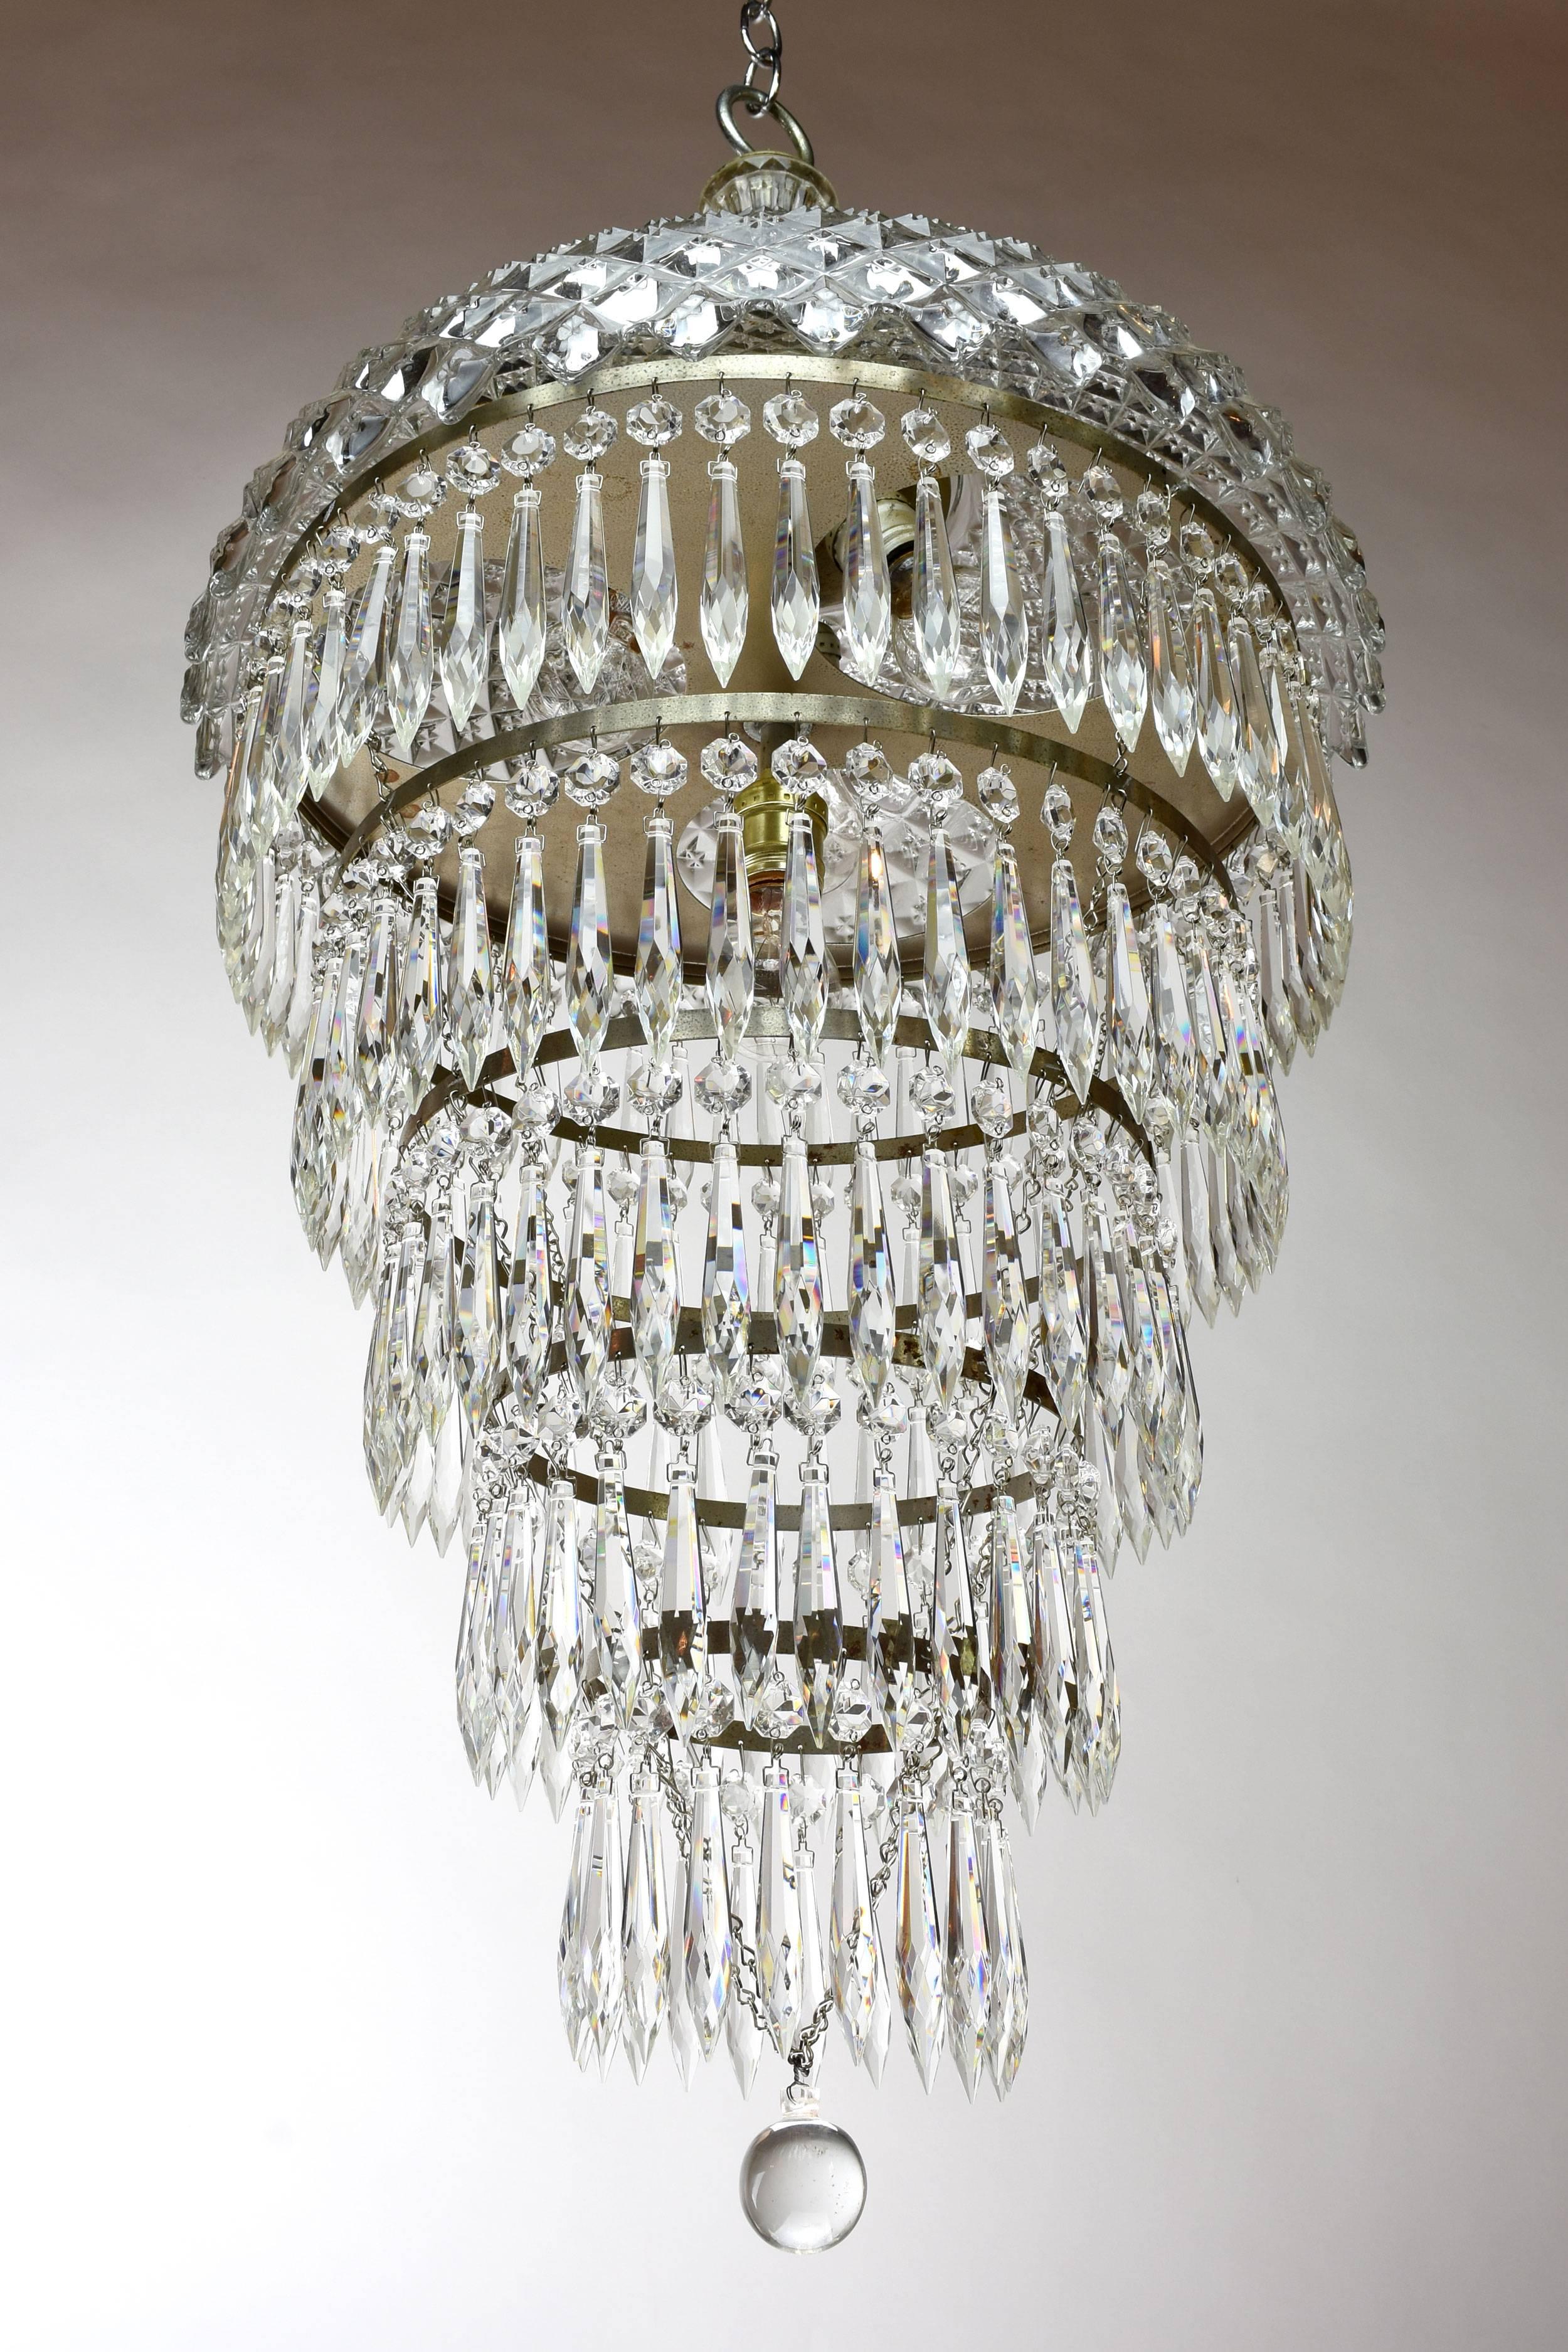 This stunning chandelier features a crystal top and five tiers of dazzling prisms atop a crystal final. This fixture will make an elegant statement piece in any home.

Four medium sockets

We find that early antique lighting was designed as